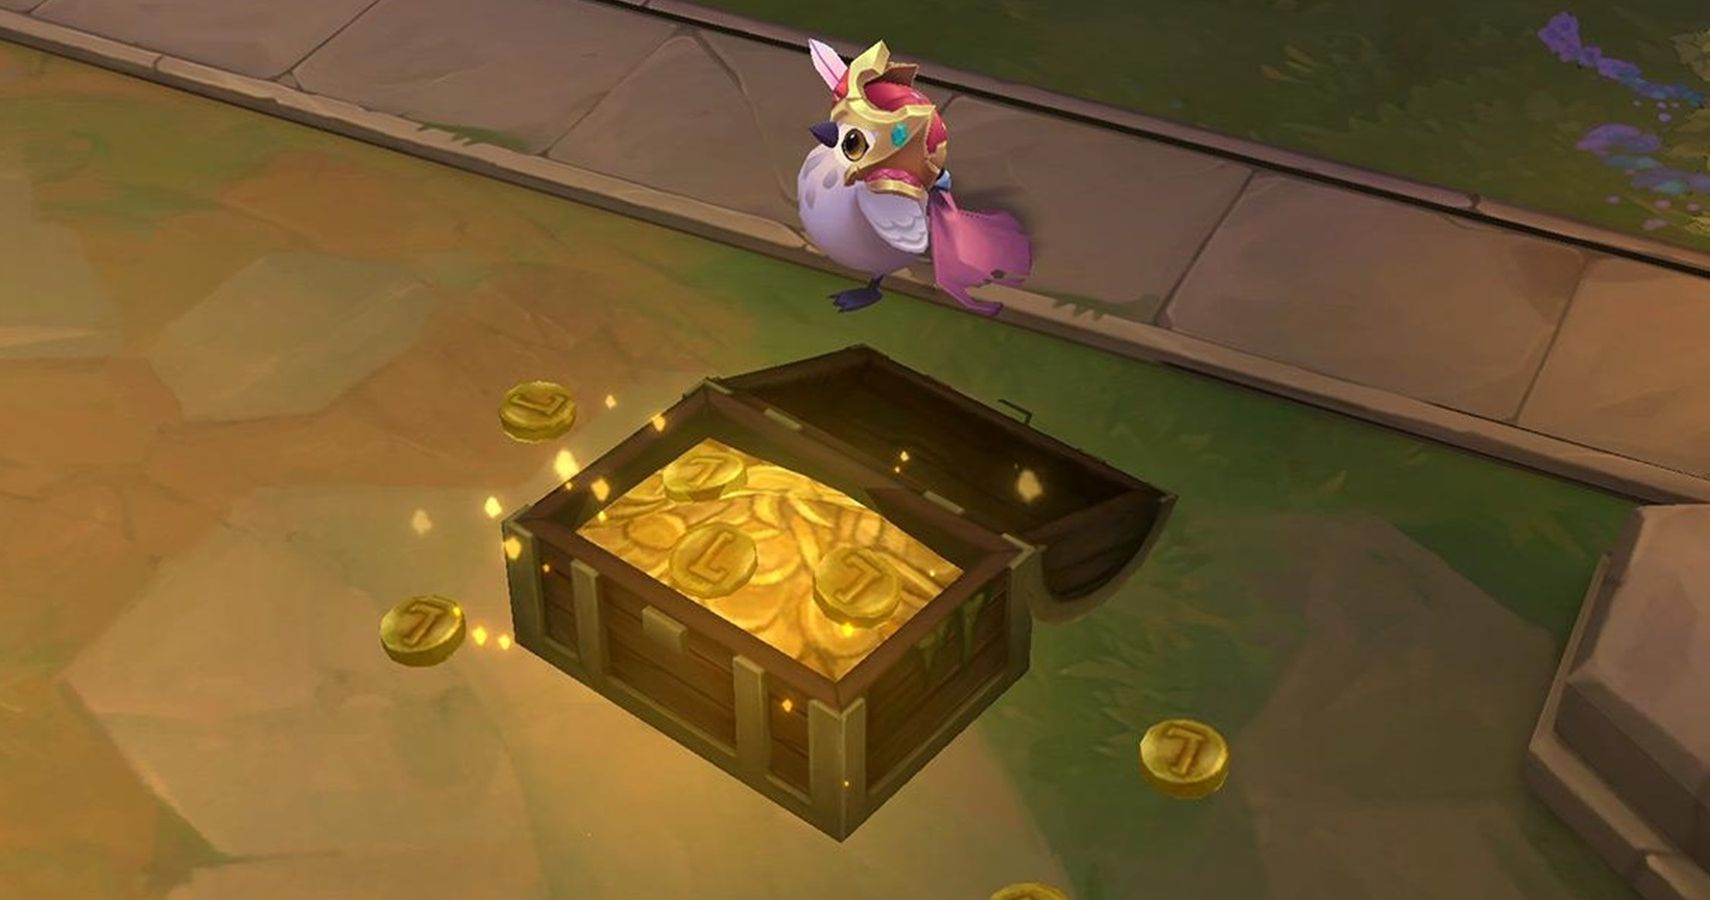 A Teamfight Tactics Bug Is Charging Players Too Much Gold